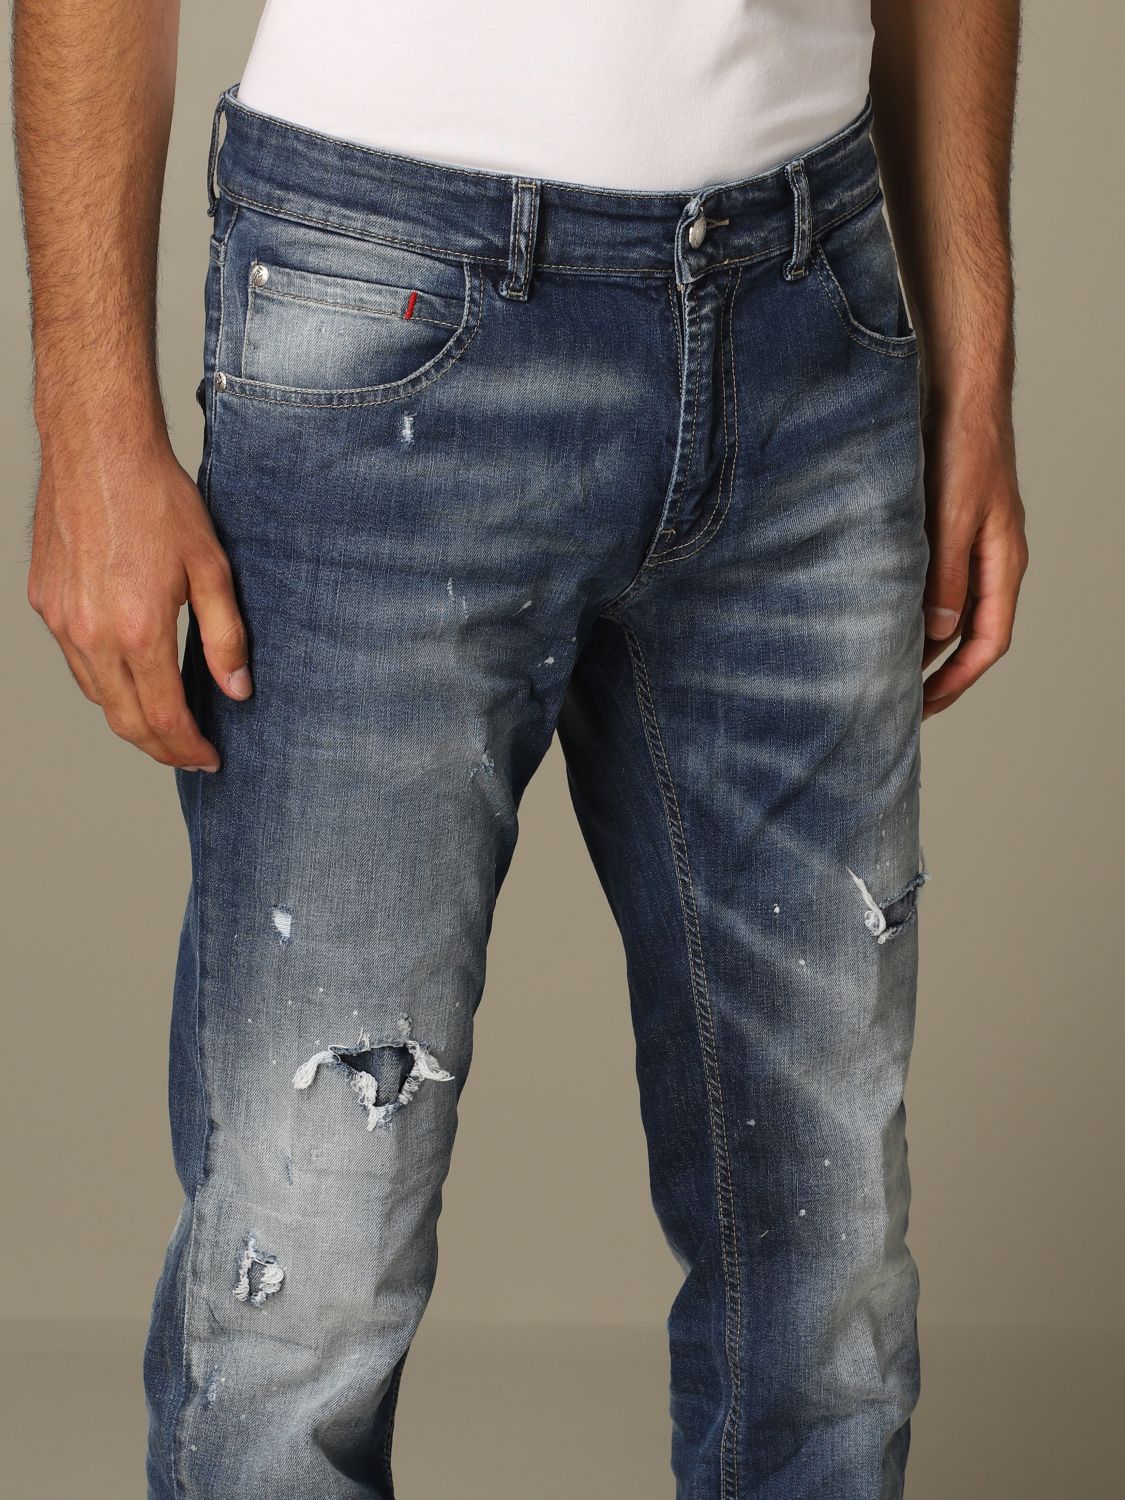 Frankie Morello Outlet: Regular fit jeans tears - Stone Washed | Frankie Morello jeans FMS0004JE 1002 on GIGLIO.COM